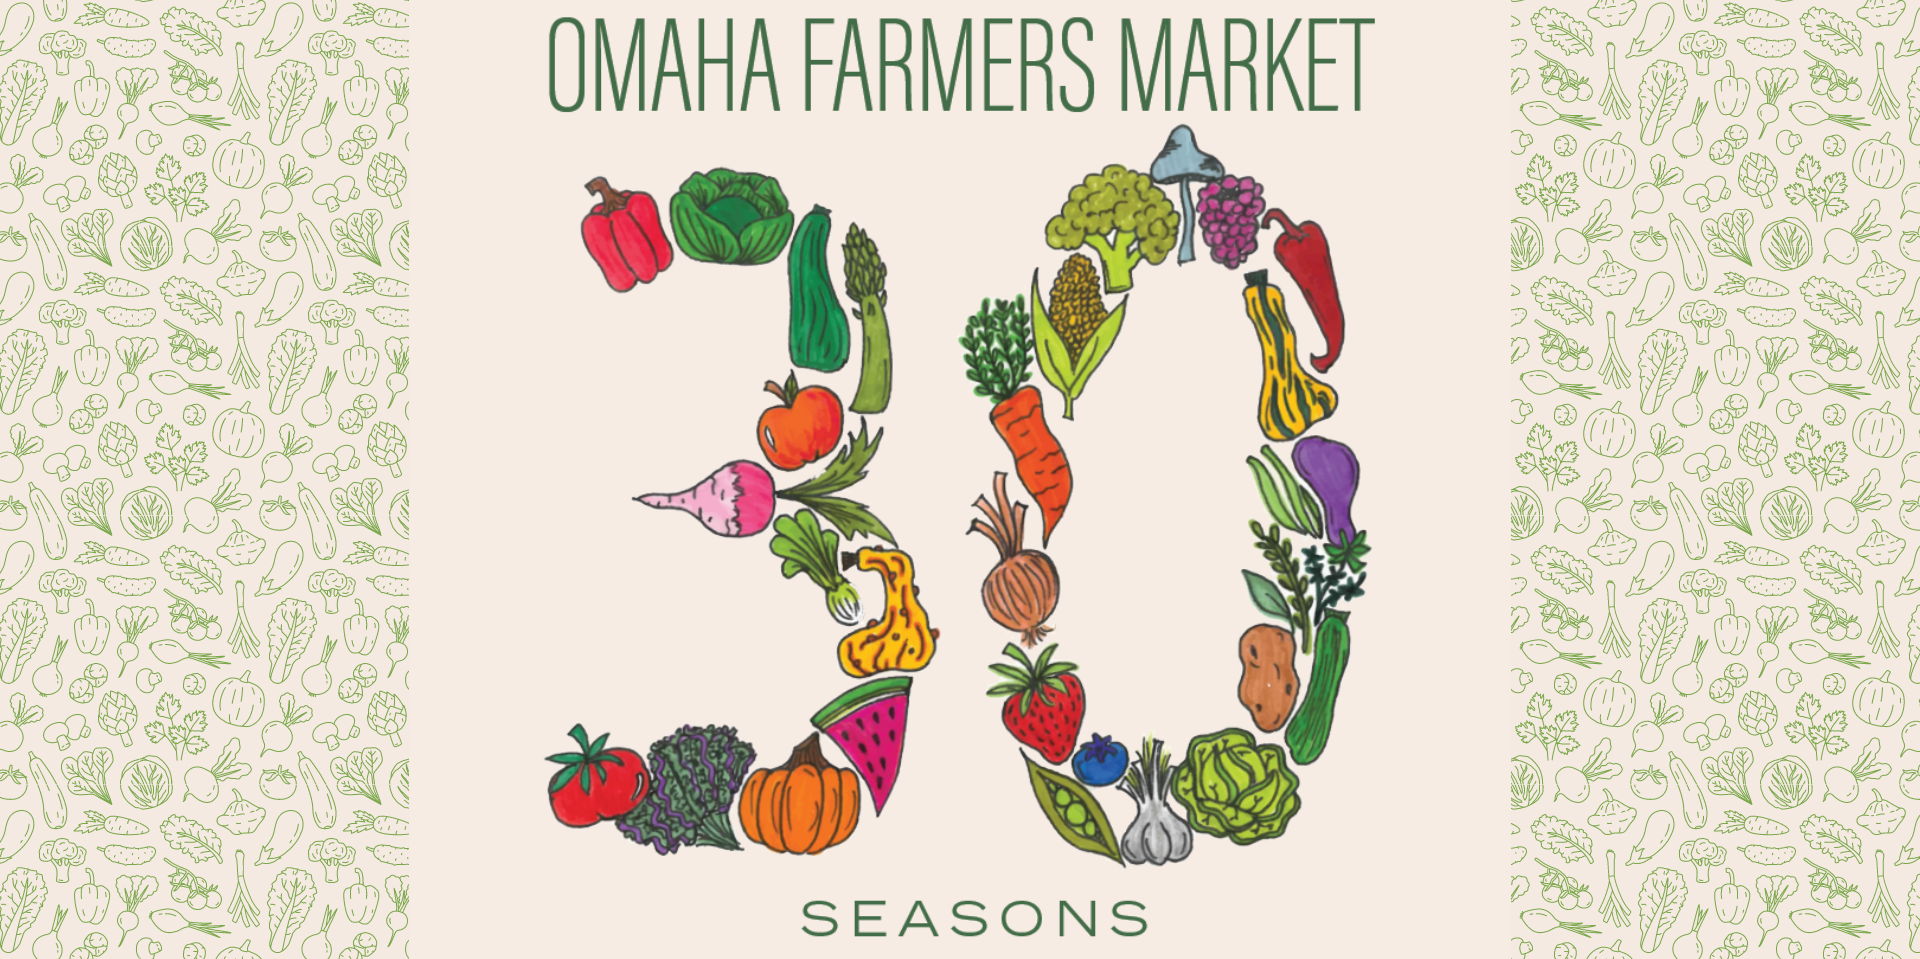 The Omaha Farmers Market promotional image